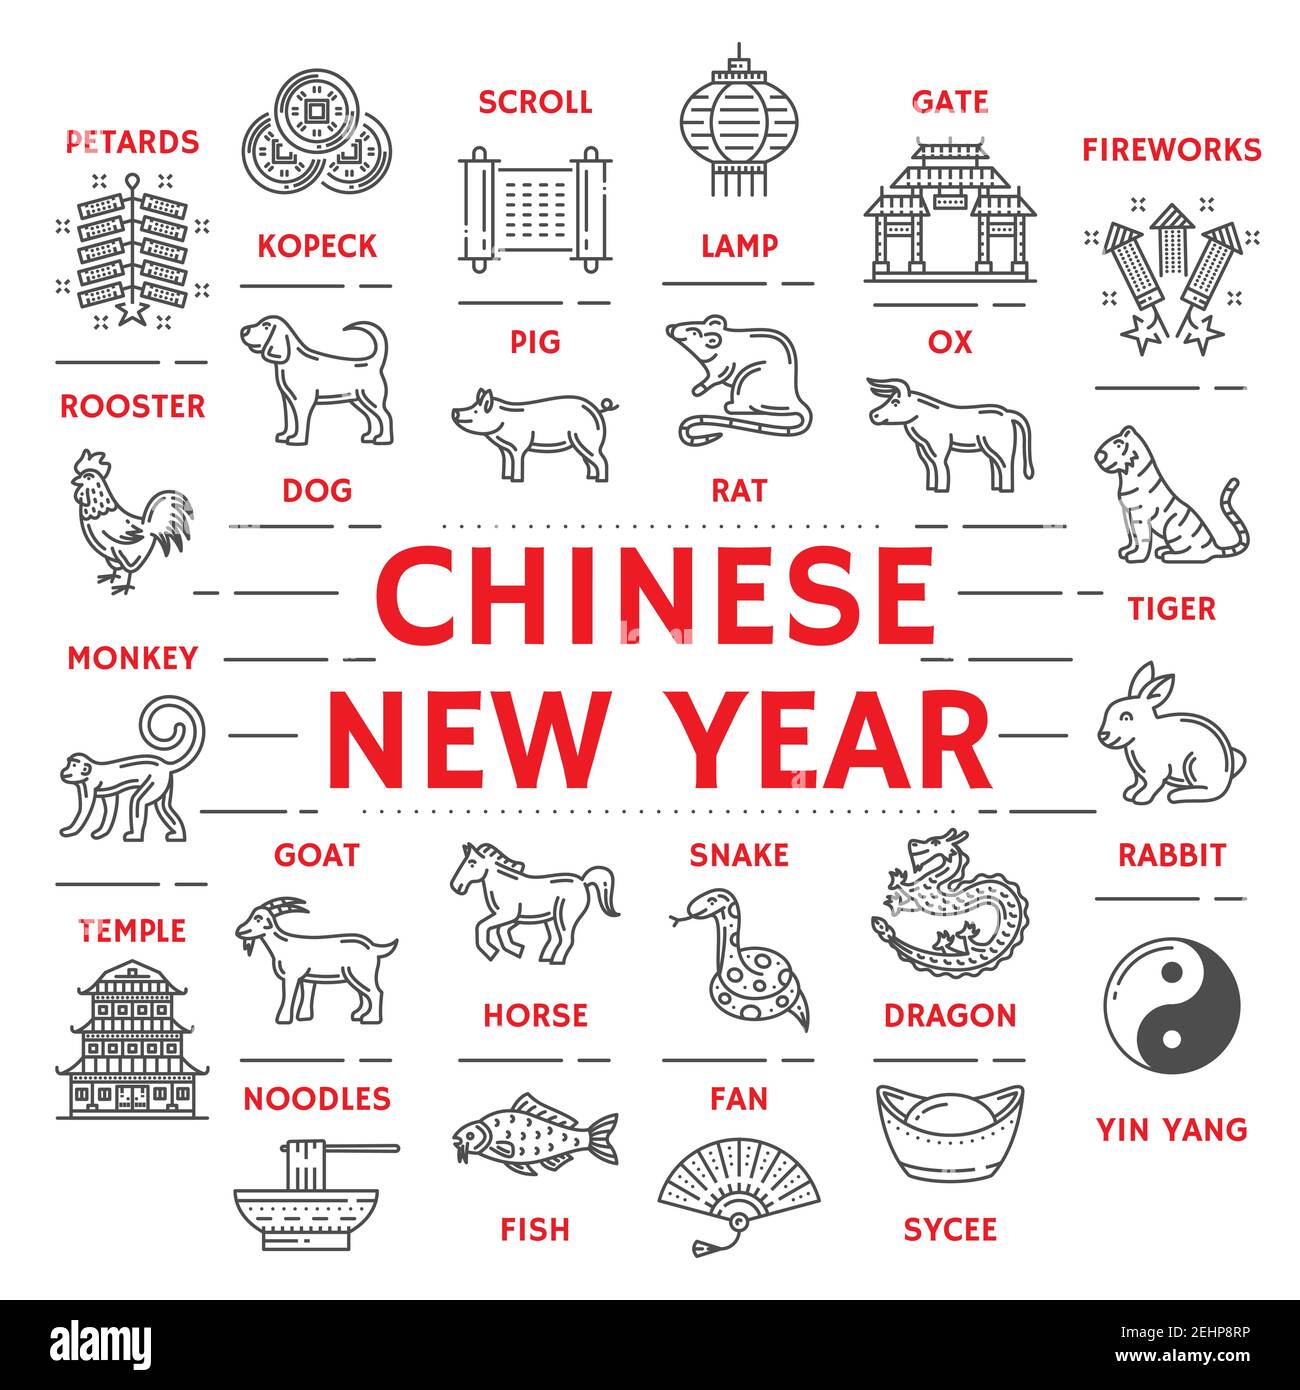 Chinese New Year icons poster zodiac animals and petards. Kopeck and scroll, lamp, gate, areworks and yin yang, sycee and fan, fish and noodles, templ Stock Vector